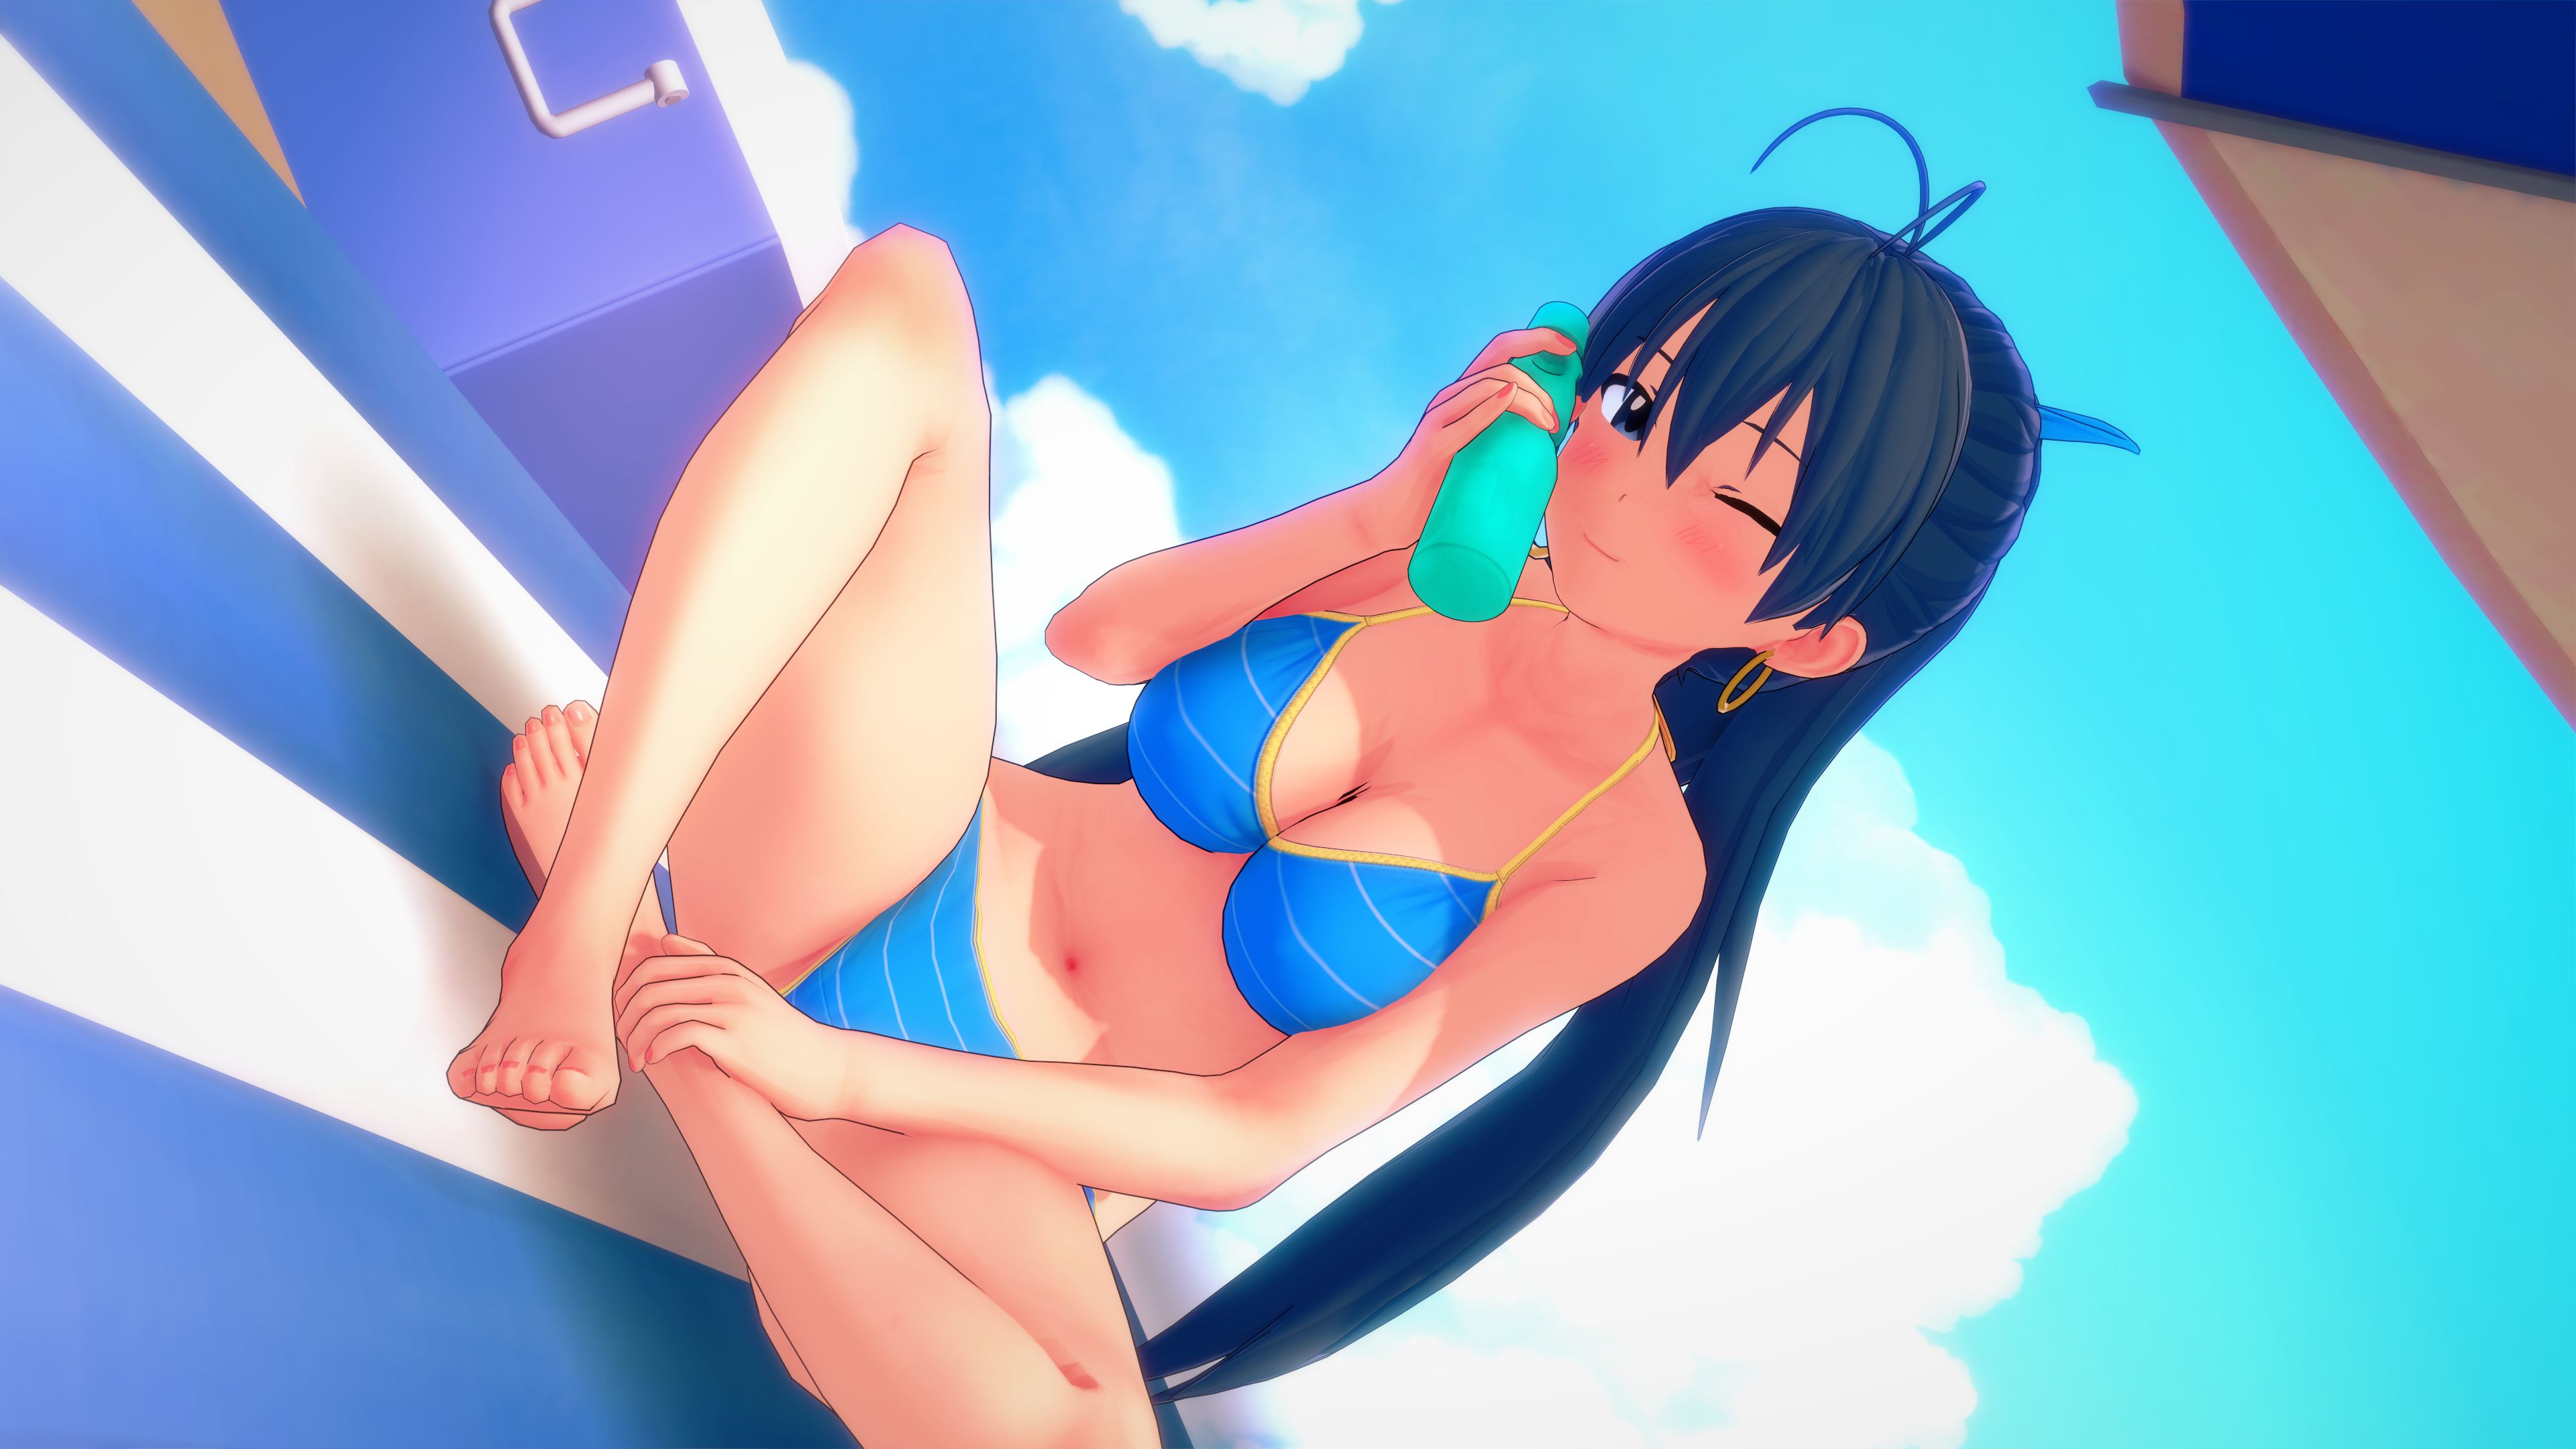 【Image】Eyemouth character made with Eroge is too wwwwww 4